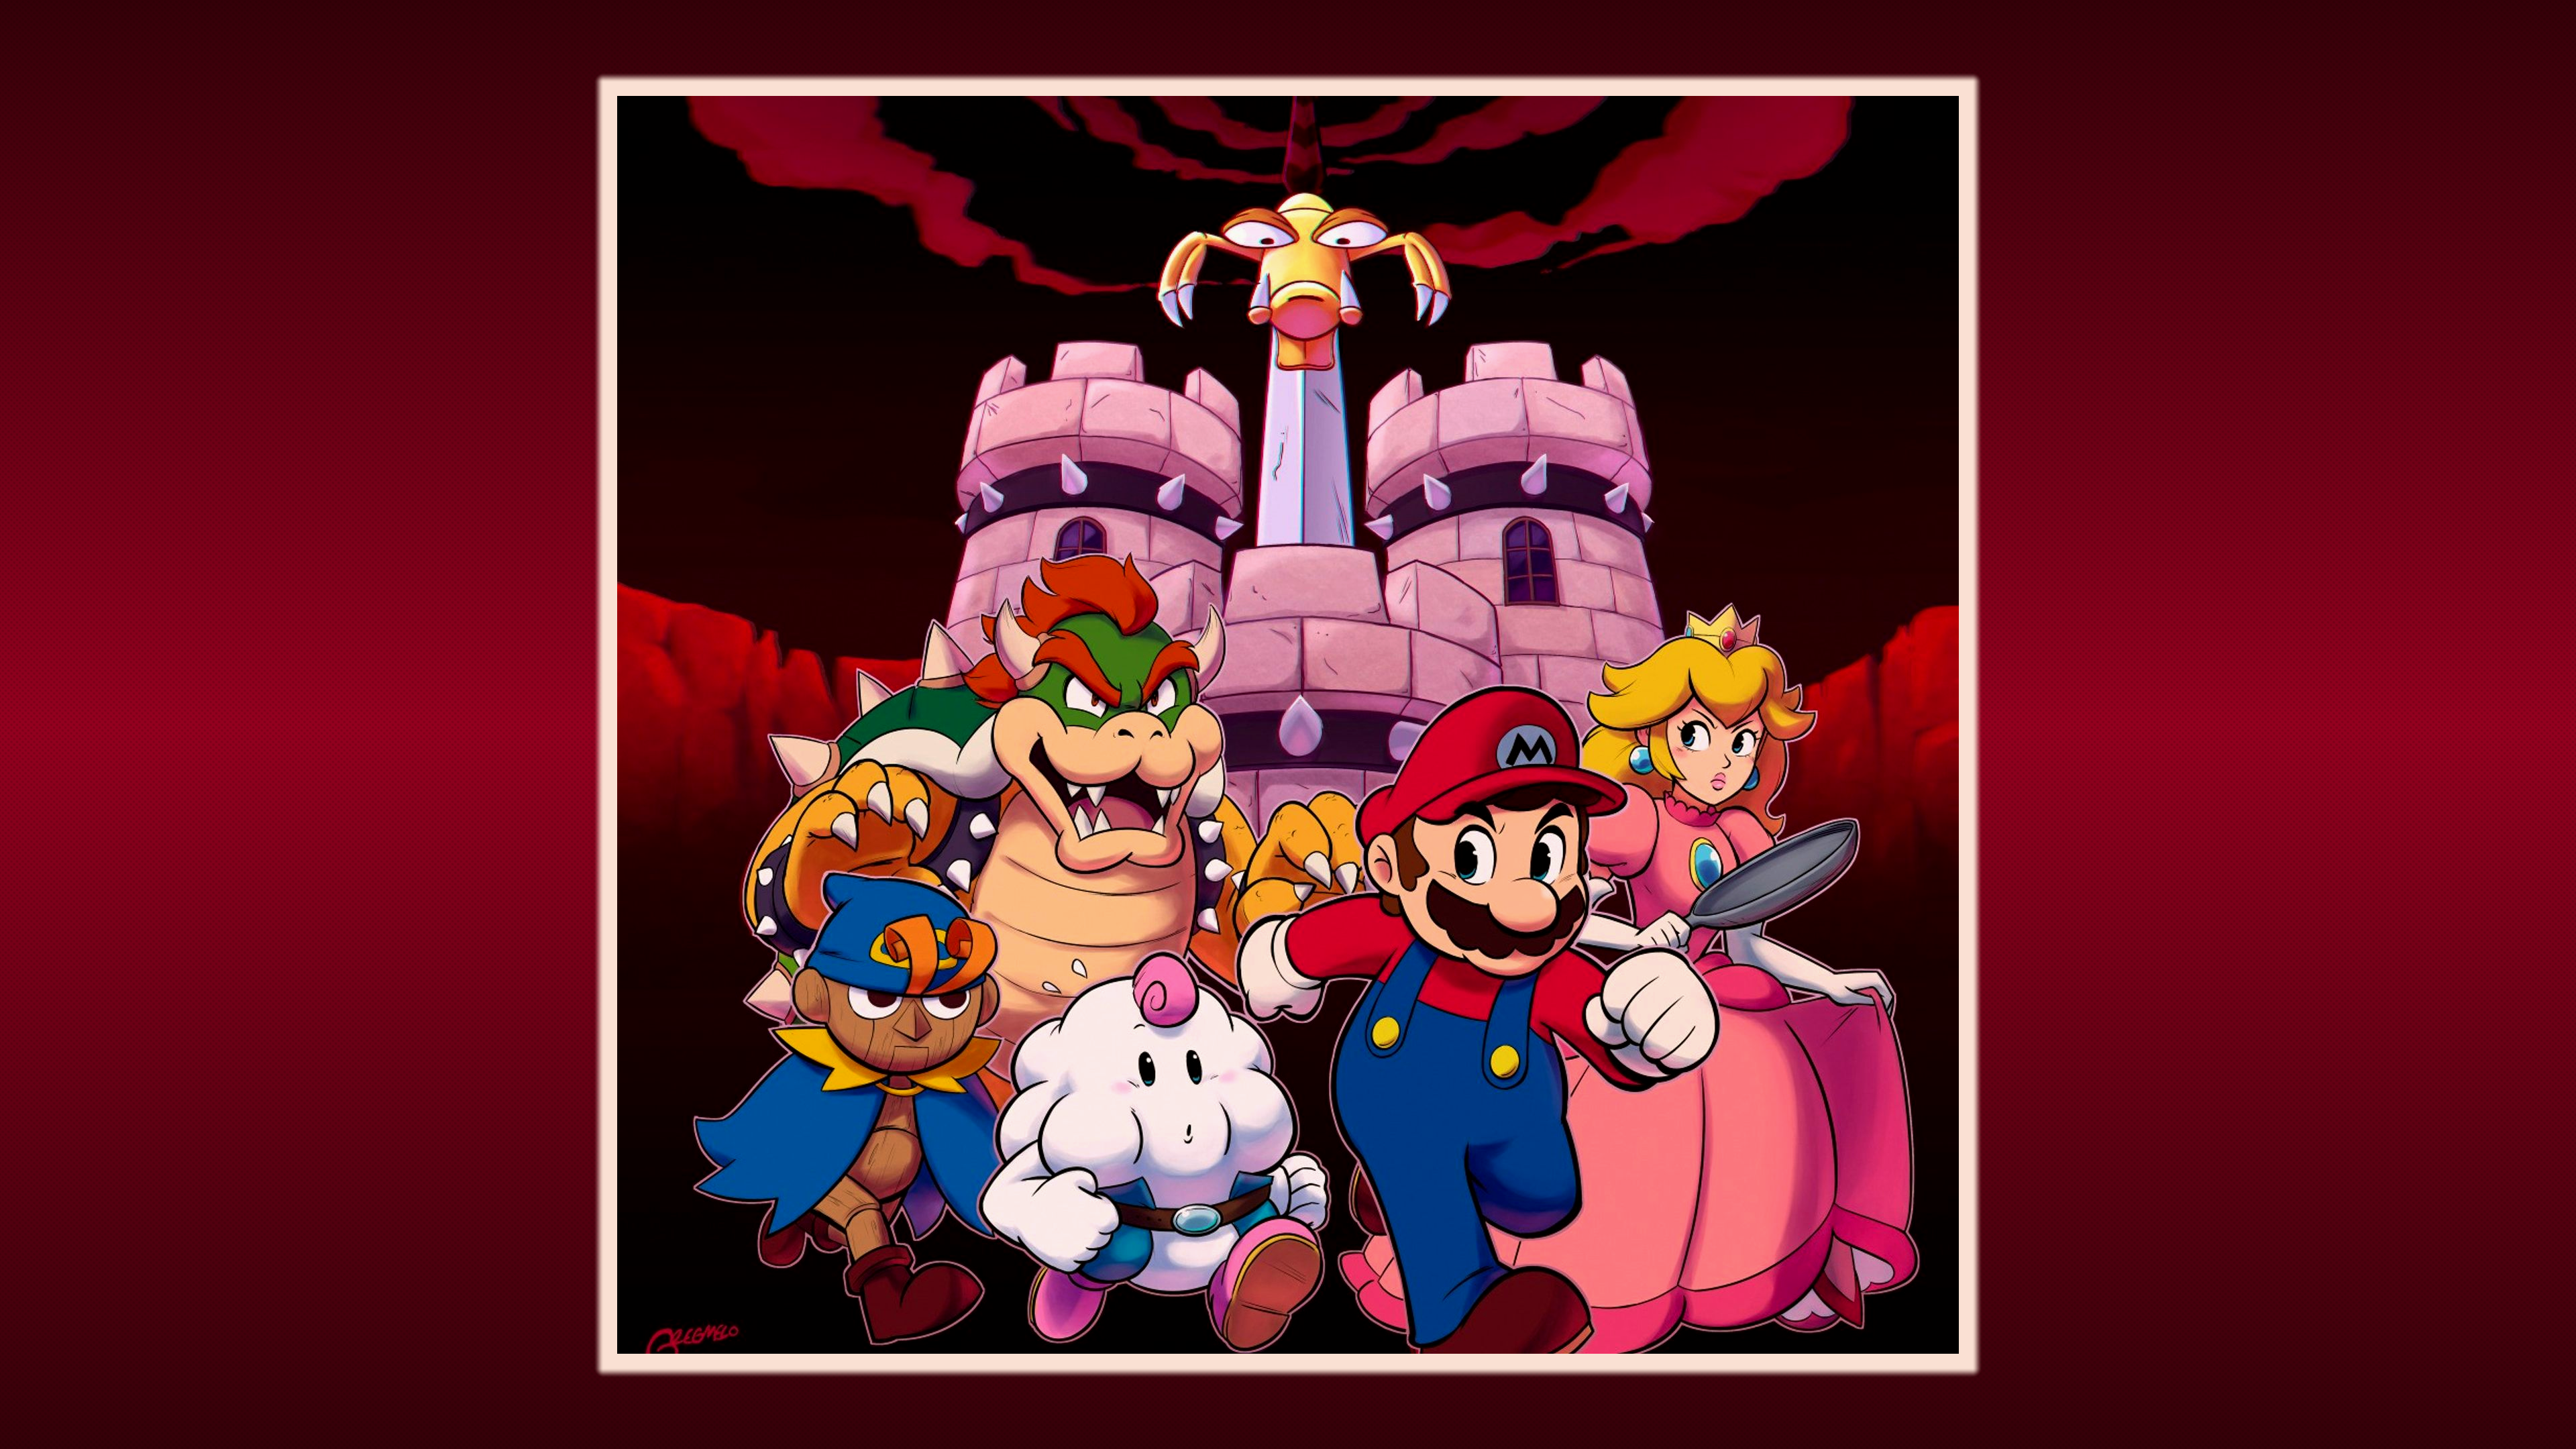 Anime 3840x2160 video games video game girls bangs super mario rpg Super Mario Mario Bros. Geno (Super Mario) Mallow (Super Mario) Pan castle Bowser Koopa white gloves dress pink dress turtle cape blue clothing suspenders red shirt hat fangs spike  spikes redhead blonde moustache claws jewel jewelry crown simple background